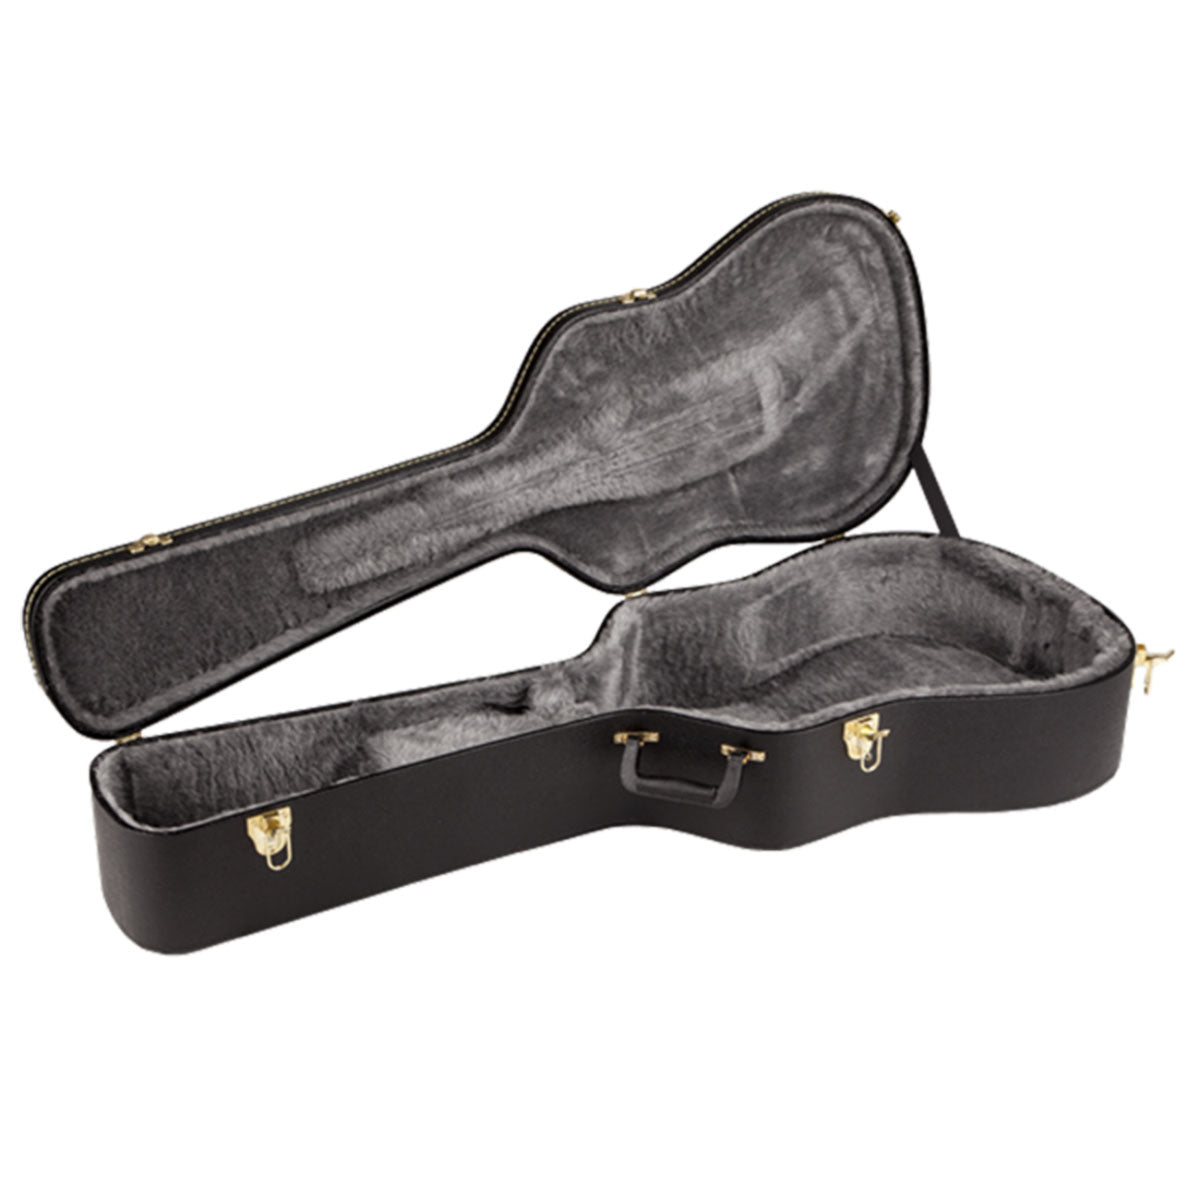 Gretsch G6243 Guitar Case for Rancher with Bigsby Black - 0996402000